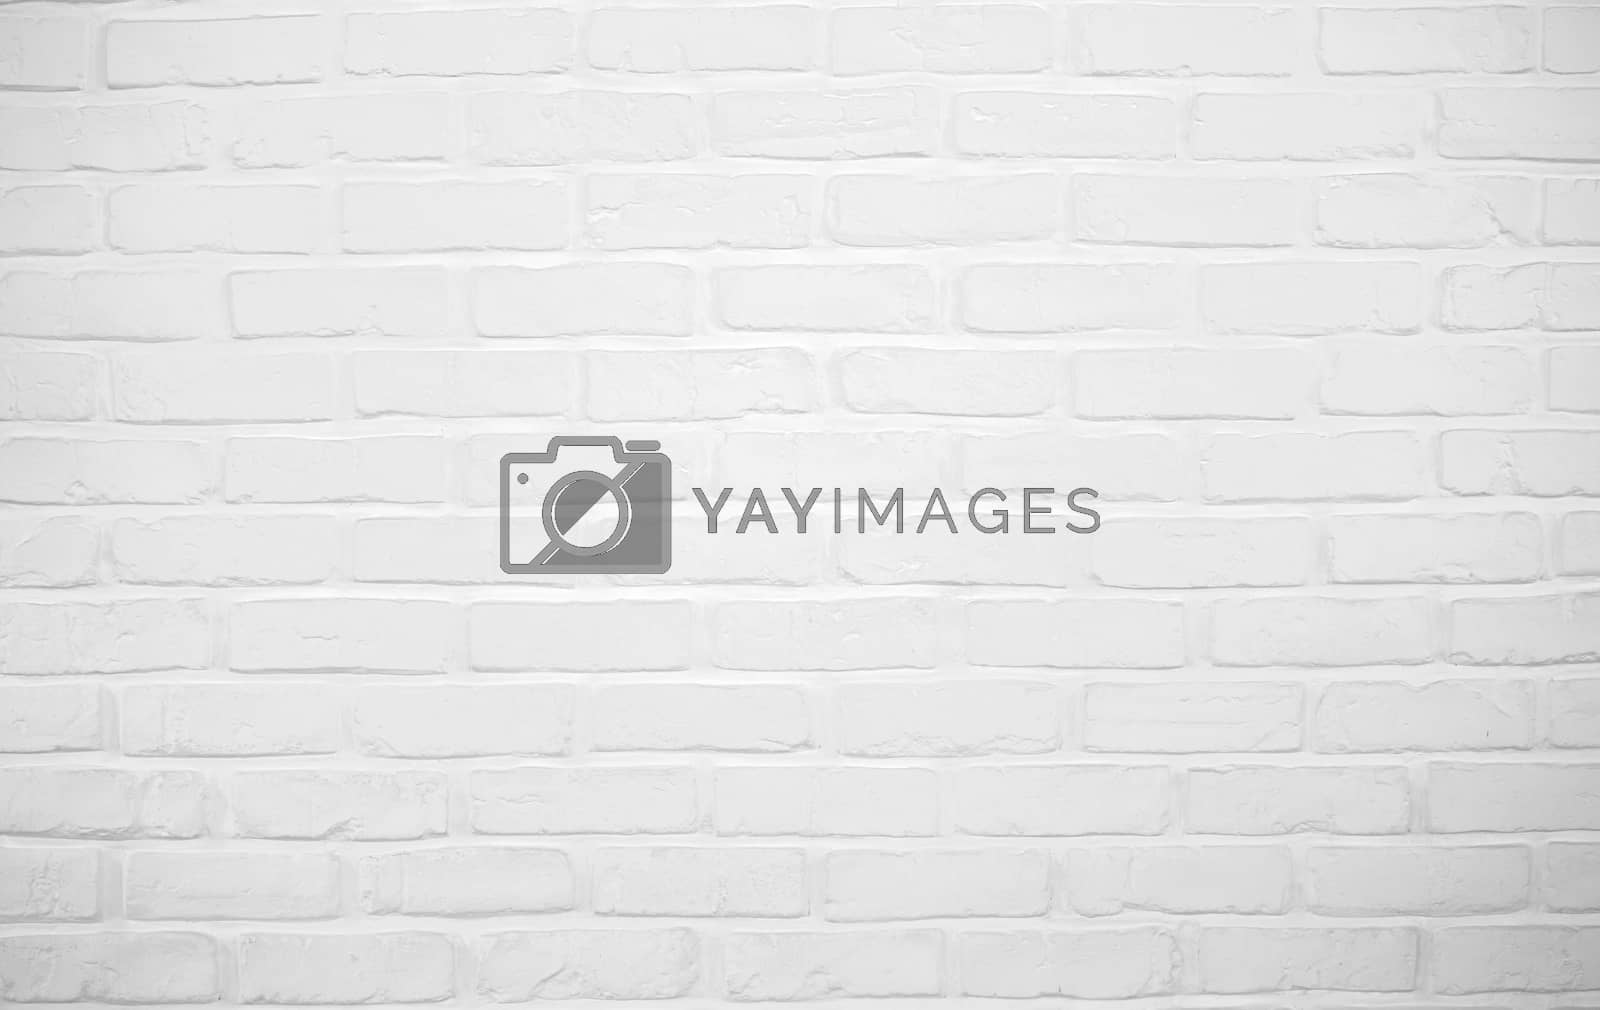 Royalty free image of White brickwall by vichie81